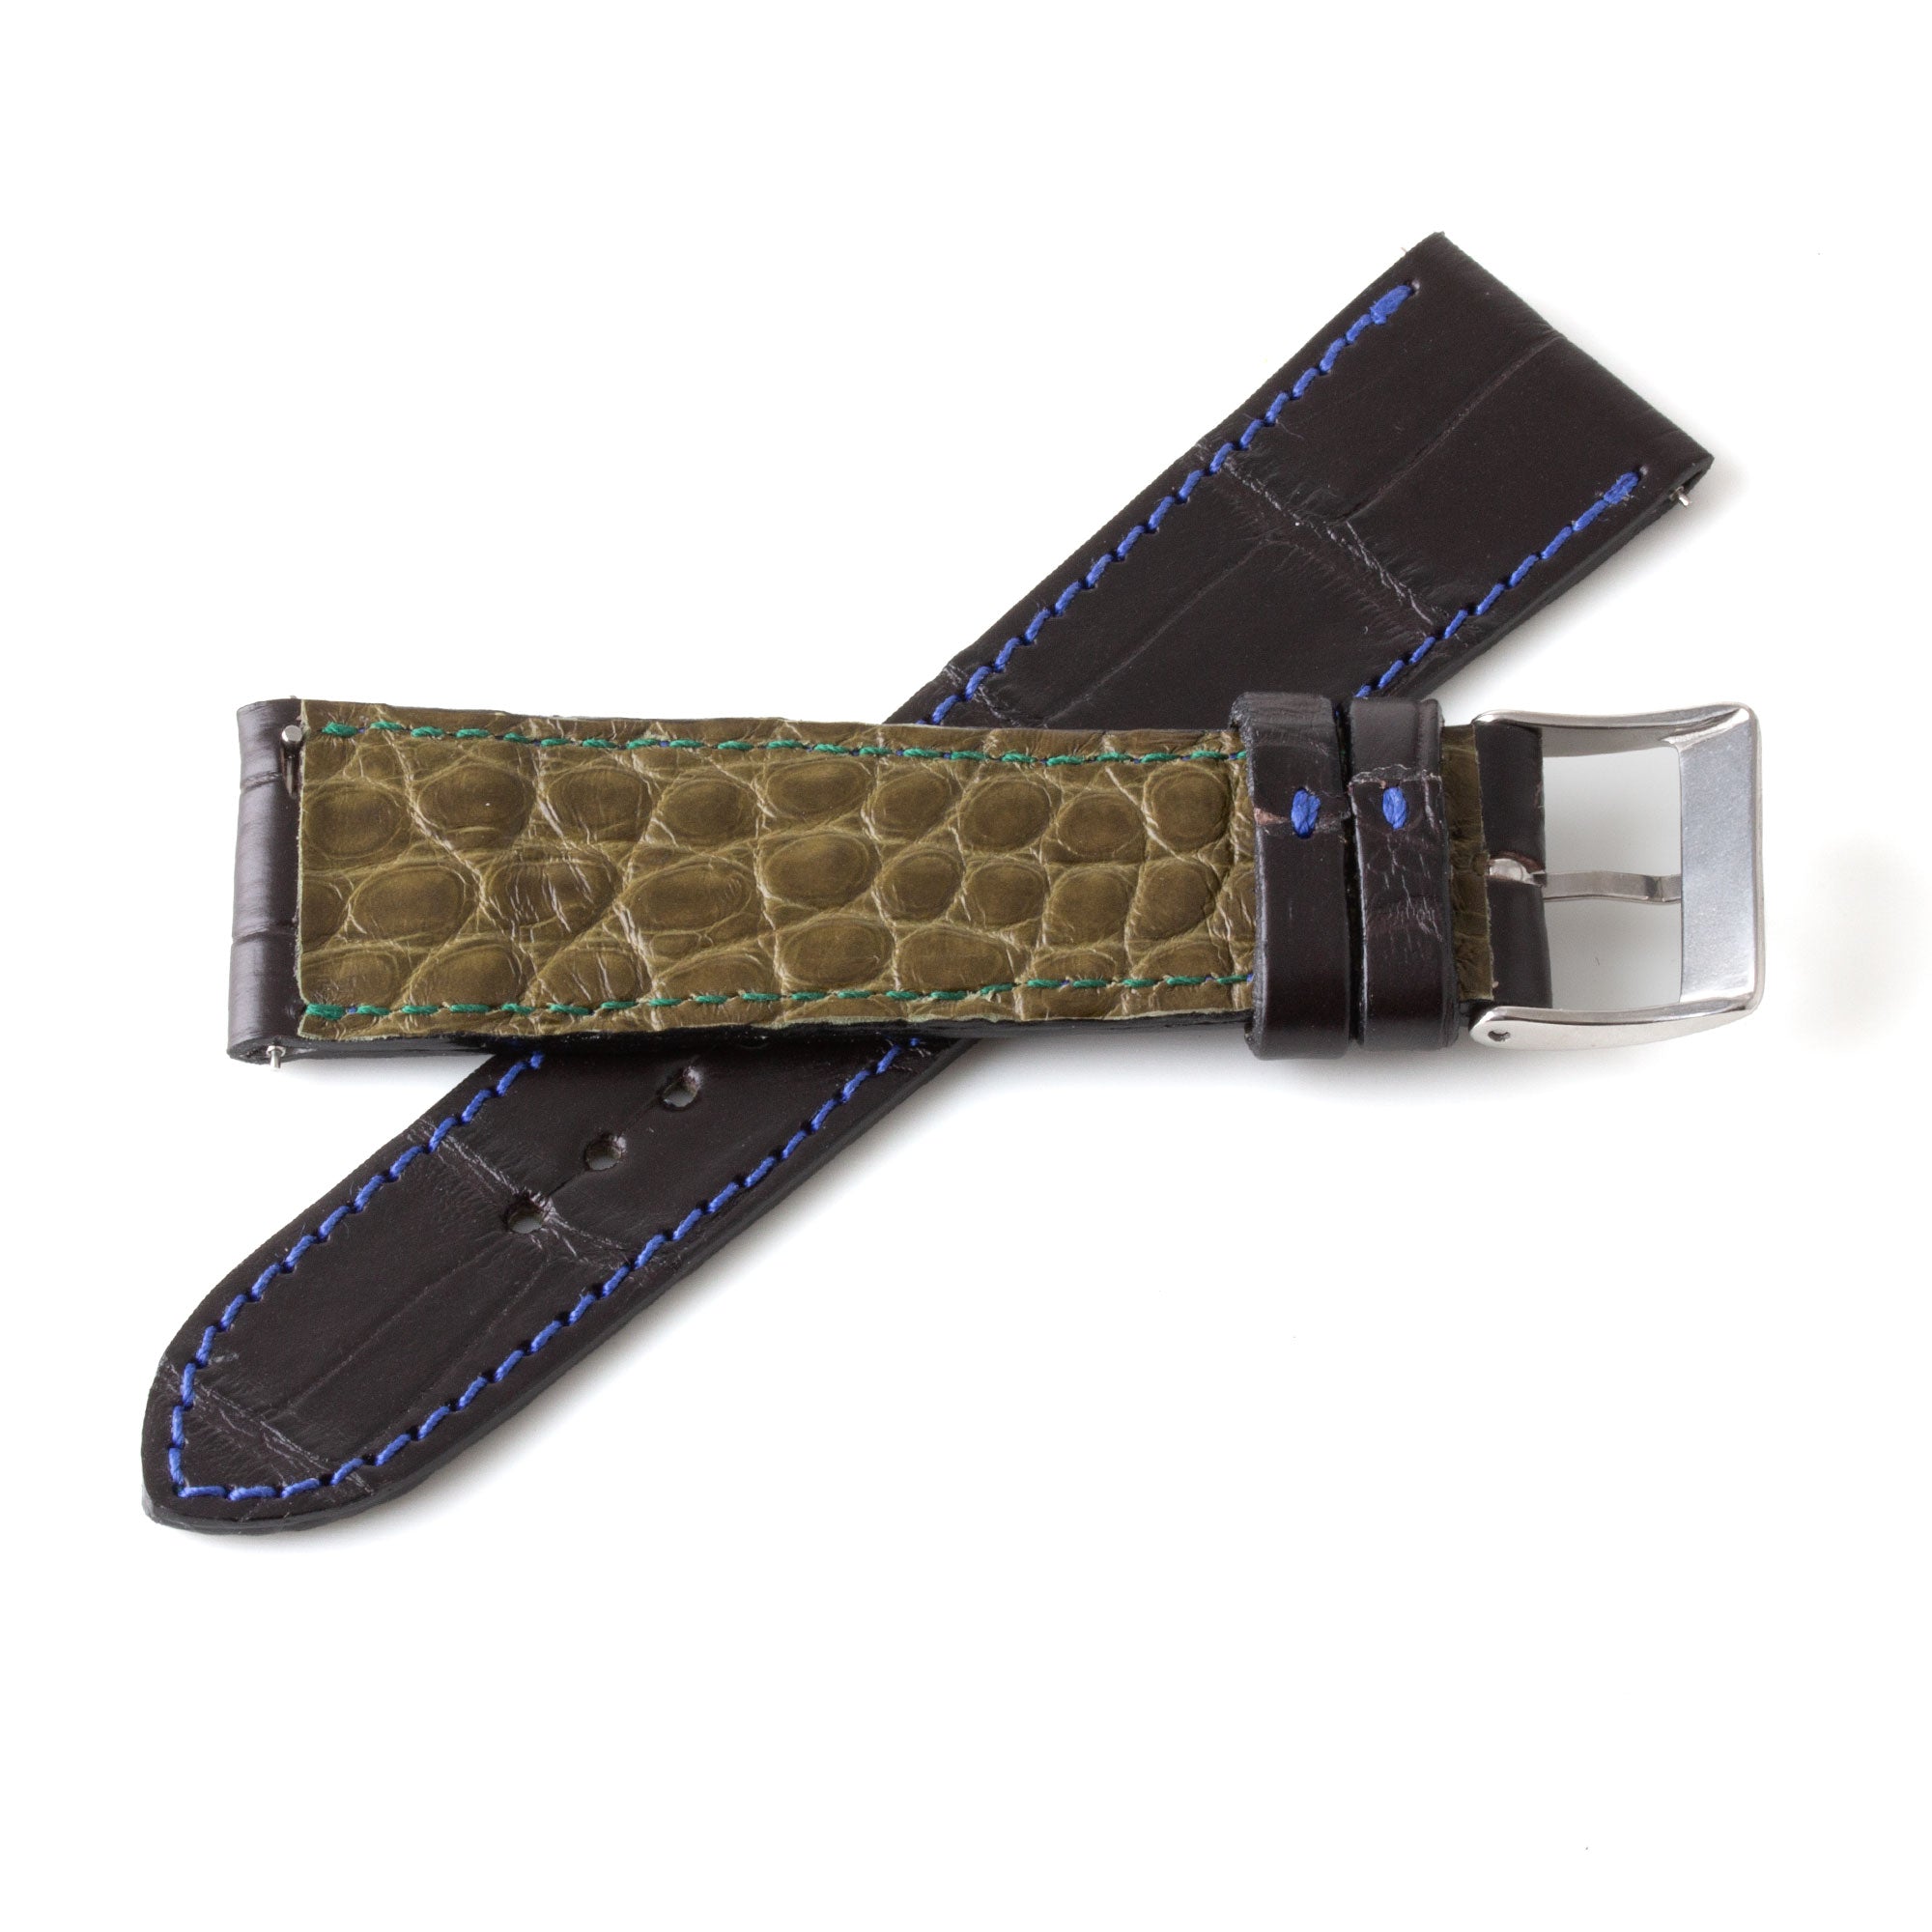 Alligator "Solo" leather watch band - 22mm width (0.87 inches) / Size M (n° 7)